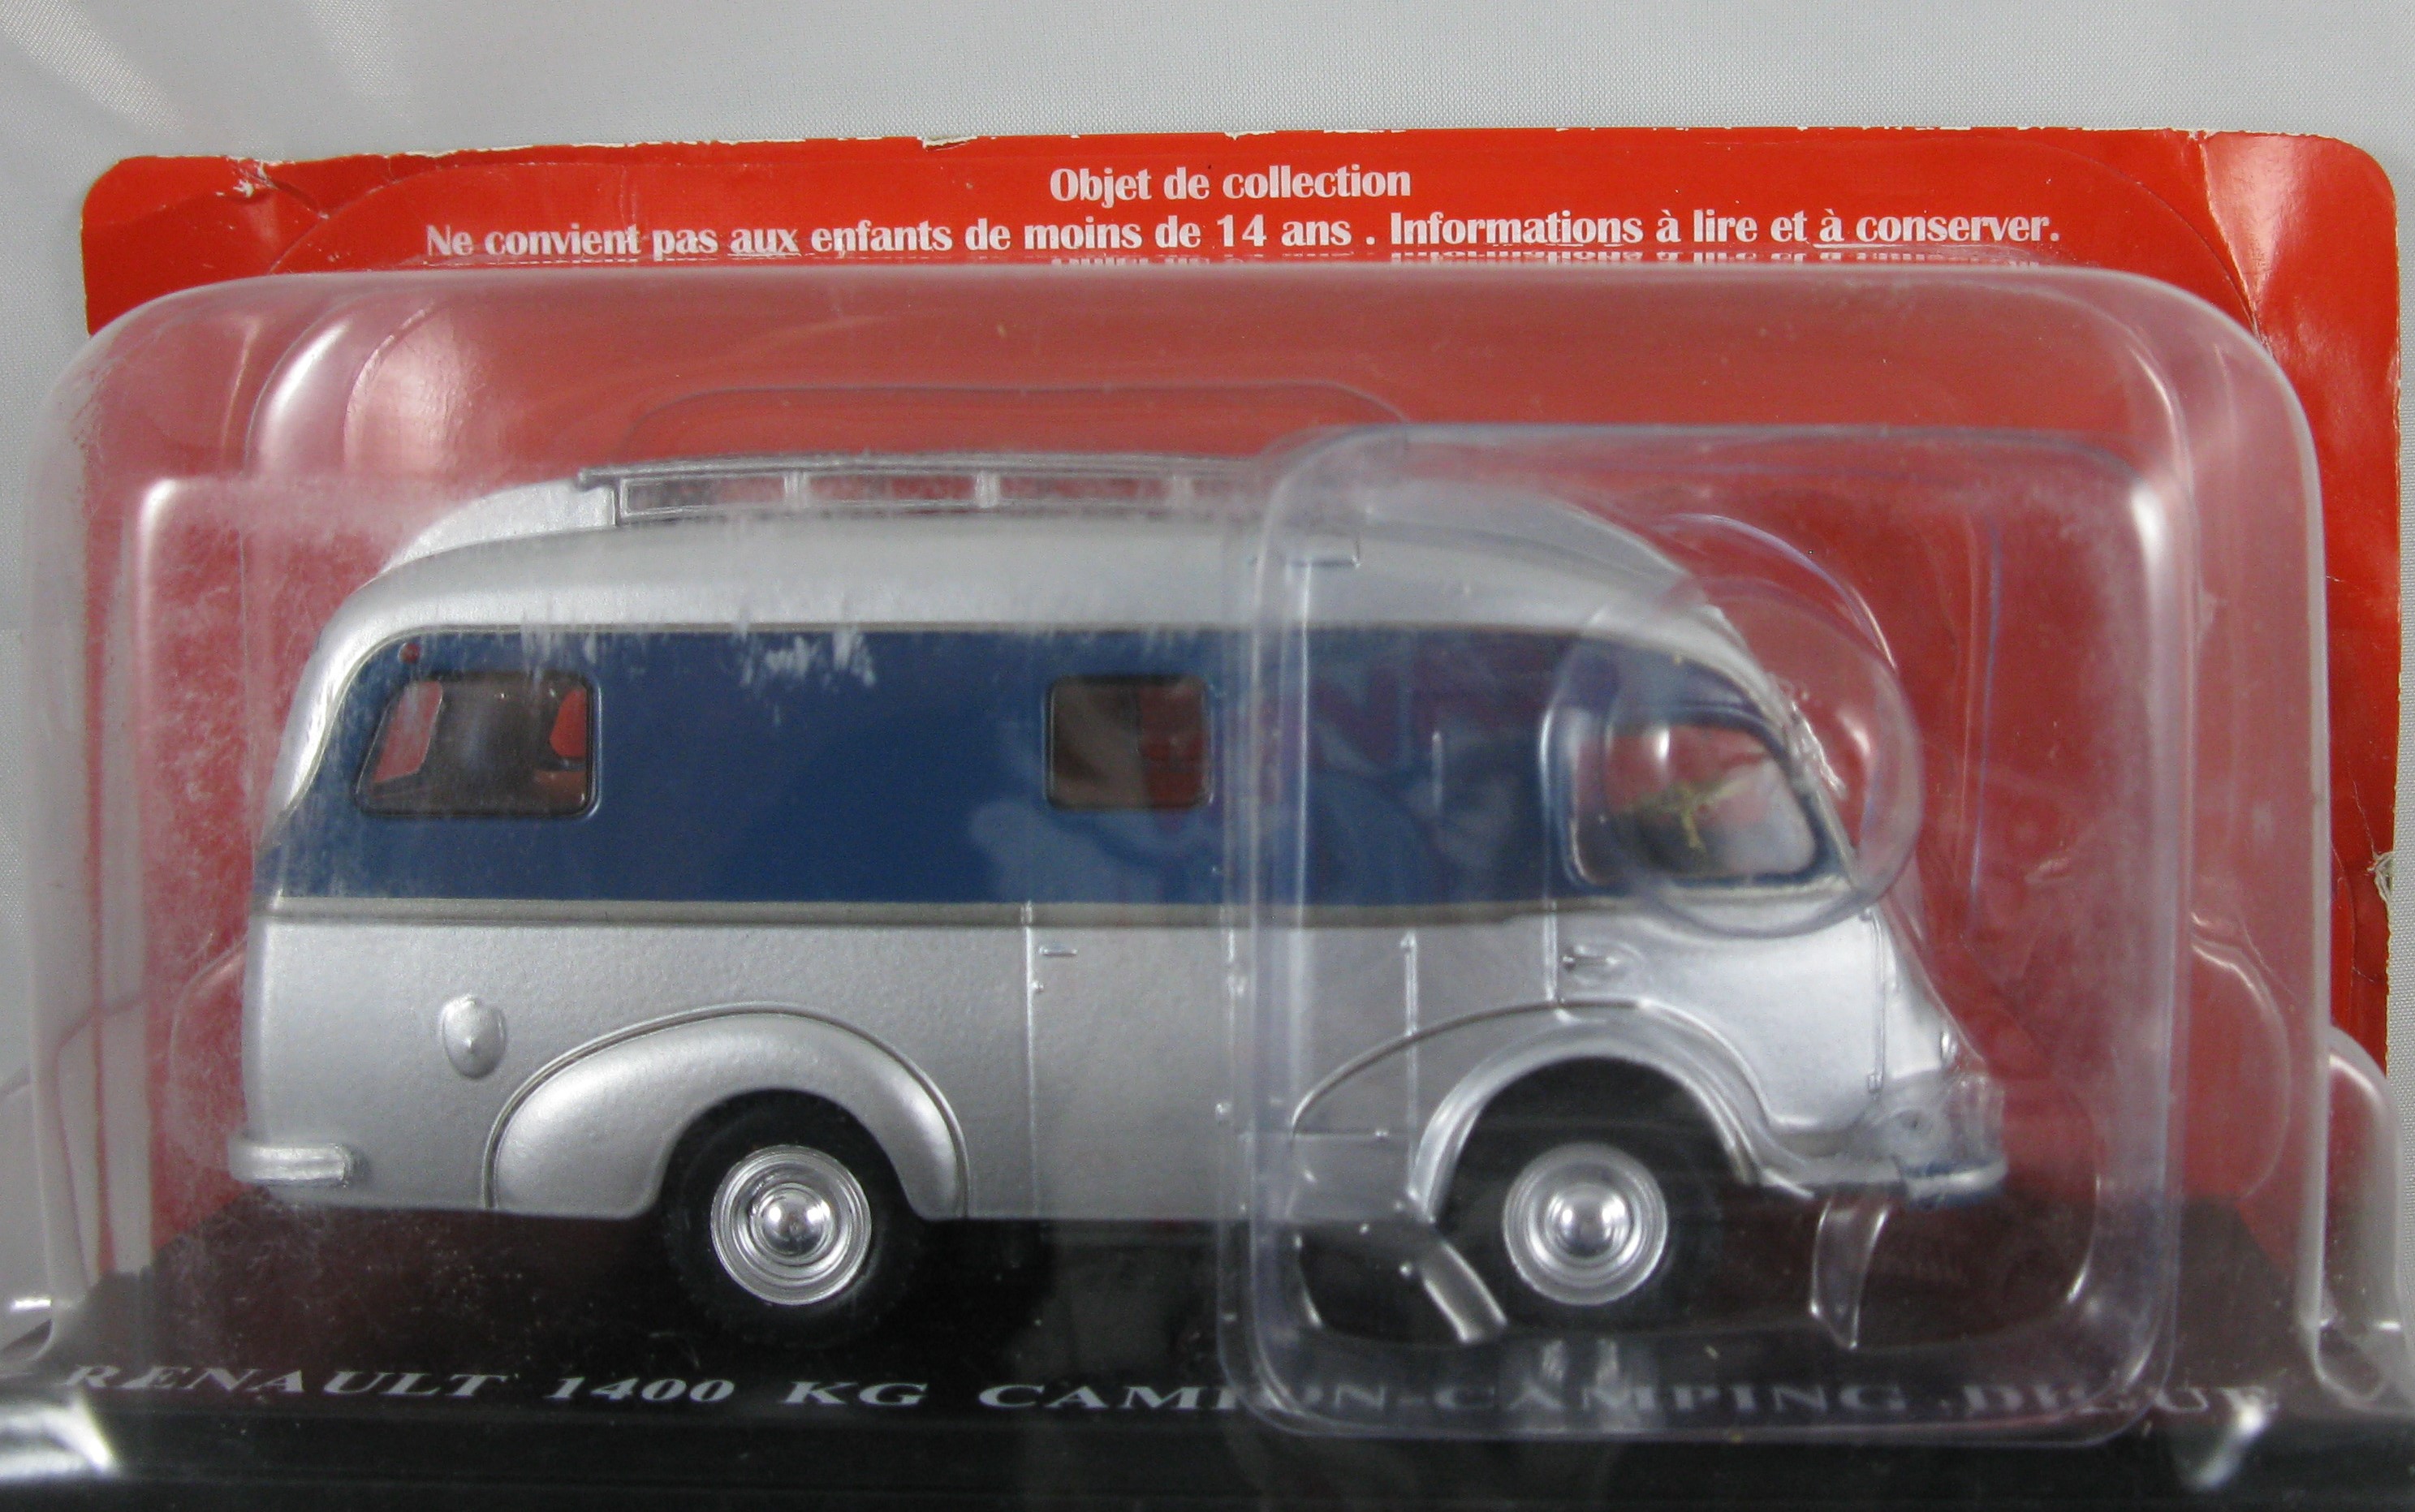 RENAULT 1400 KG Camions-camping  Digue CC4 1/43 camping cars hachettes 